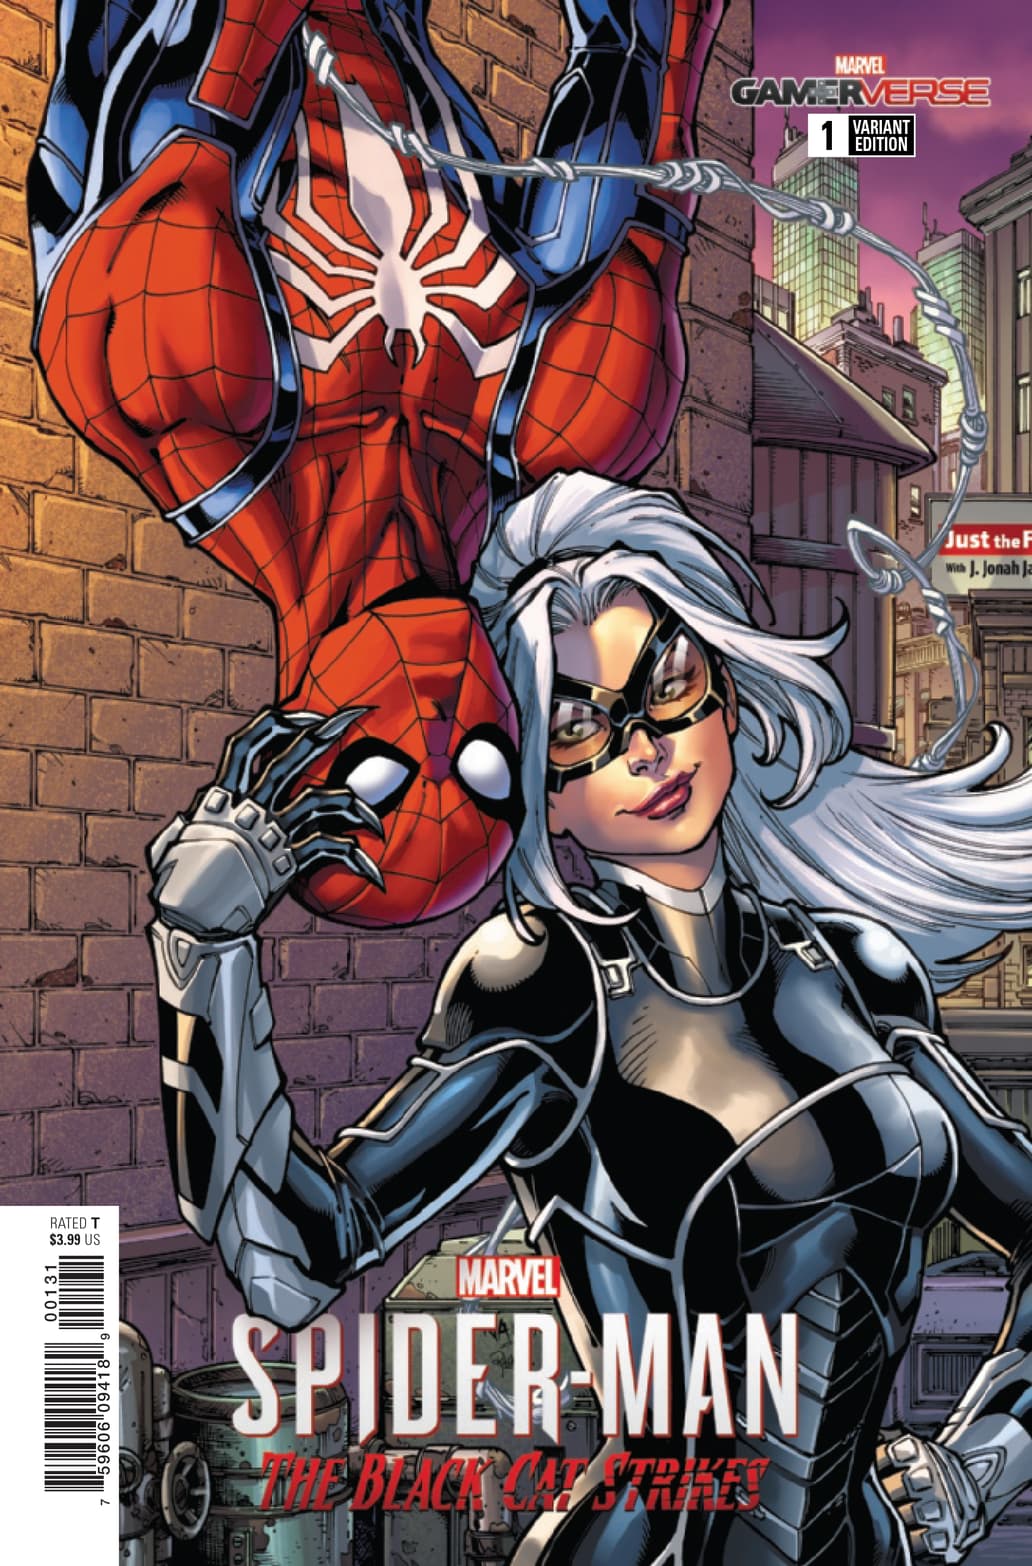 MARVEL'S SPIDER-MAN: THE BLACK CAT STRIKES #1 — Variant Cover by Todd Nauck